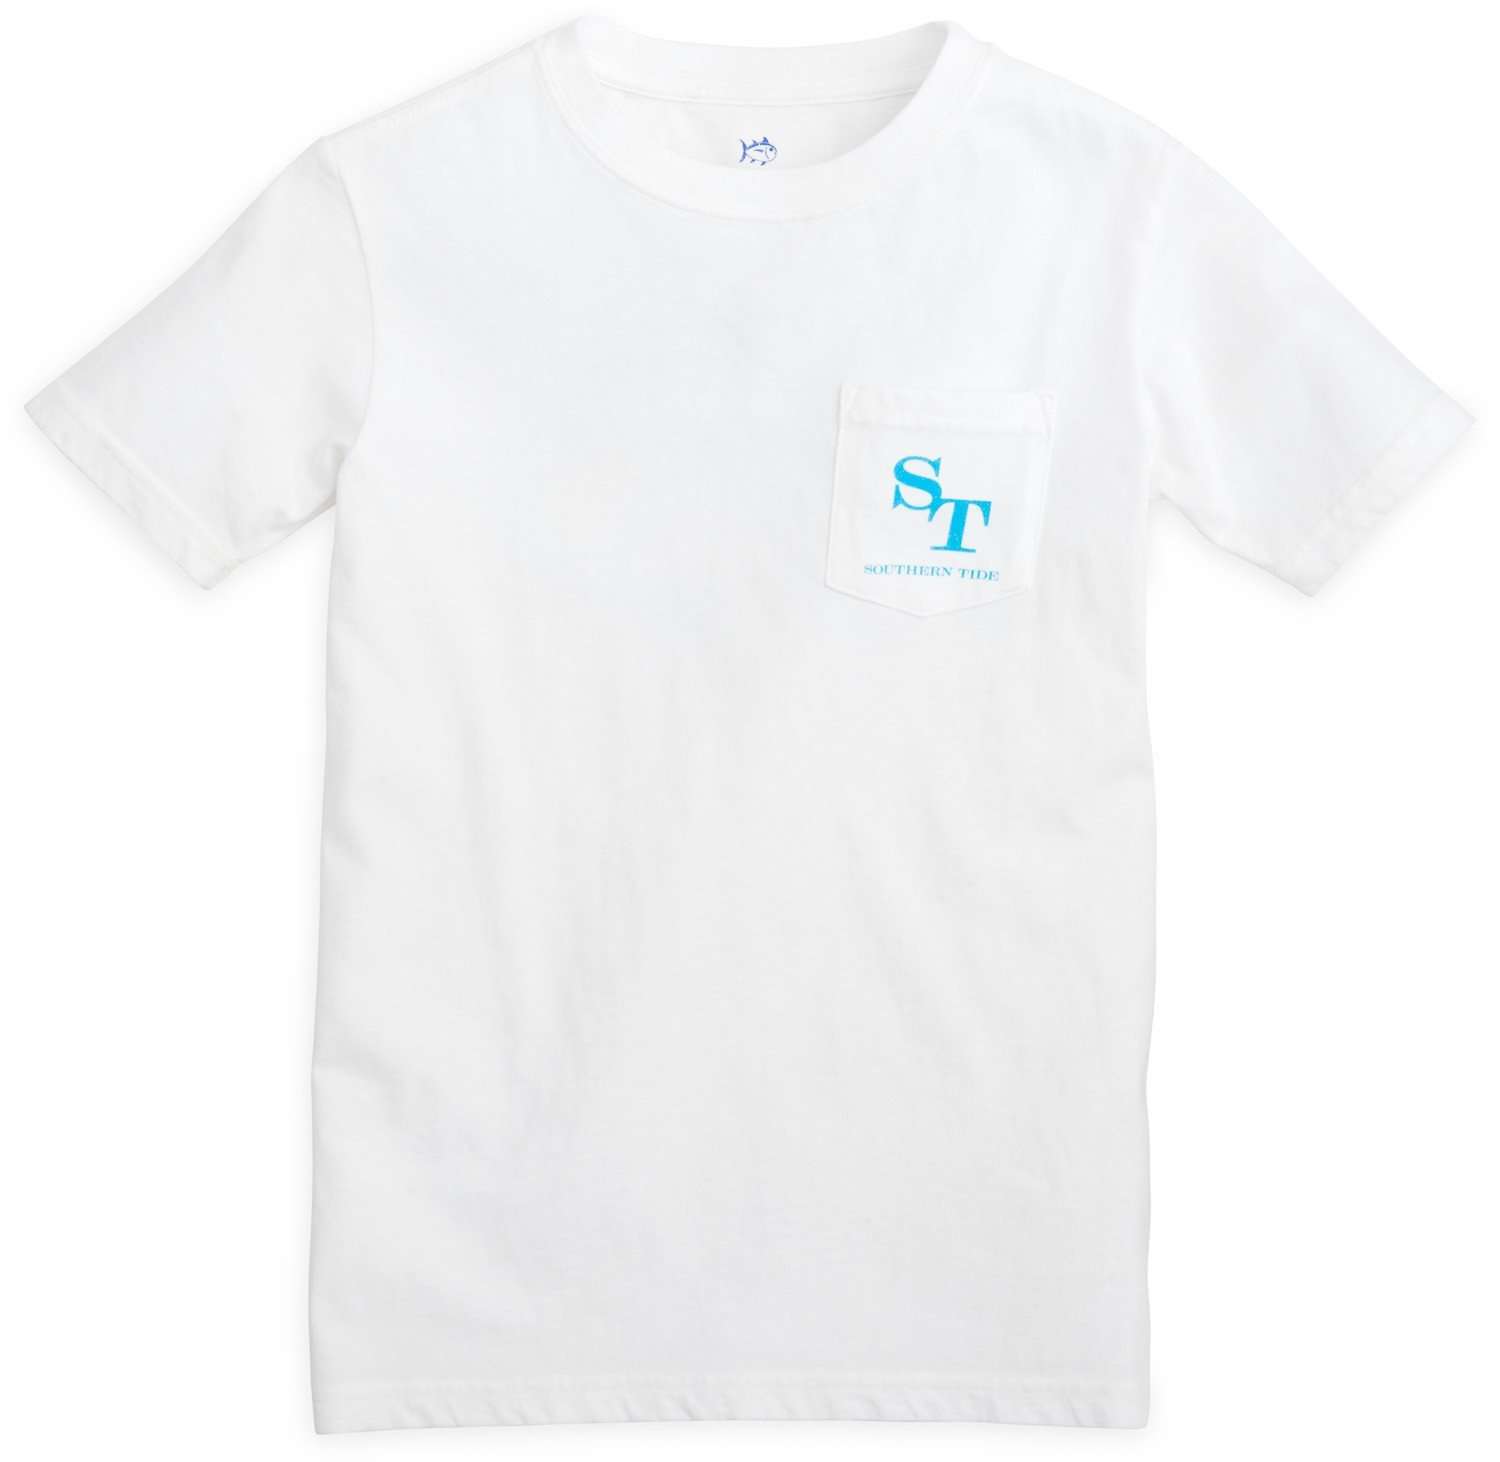 Kids Outline Skipjack Tee Shirt in Classic White by Southern Tide - Country Club Prep